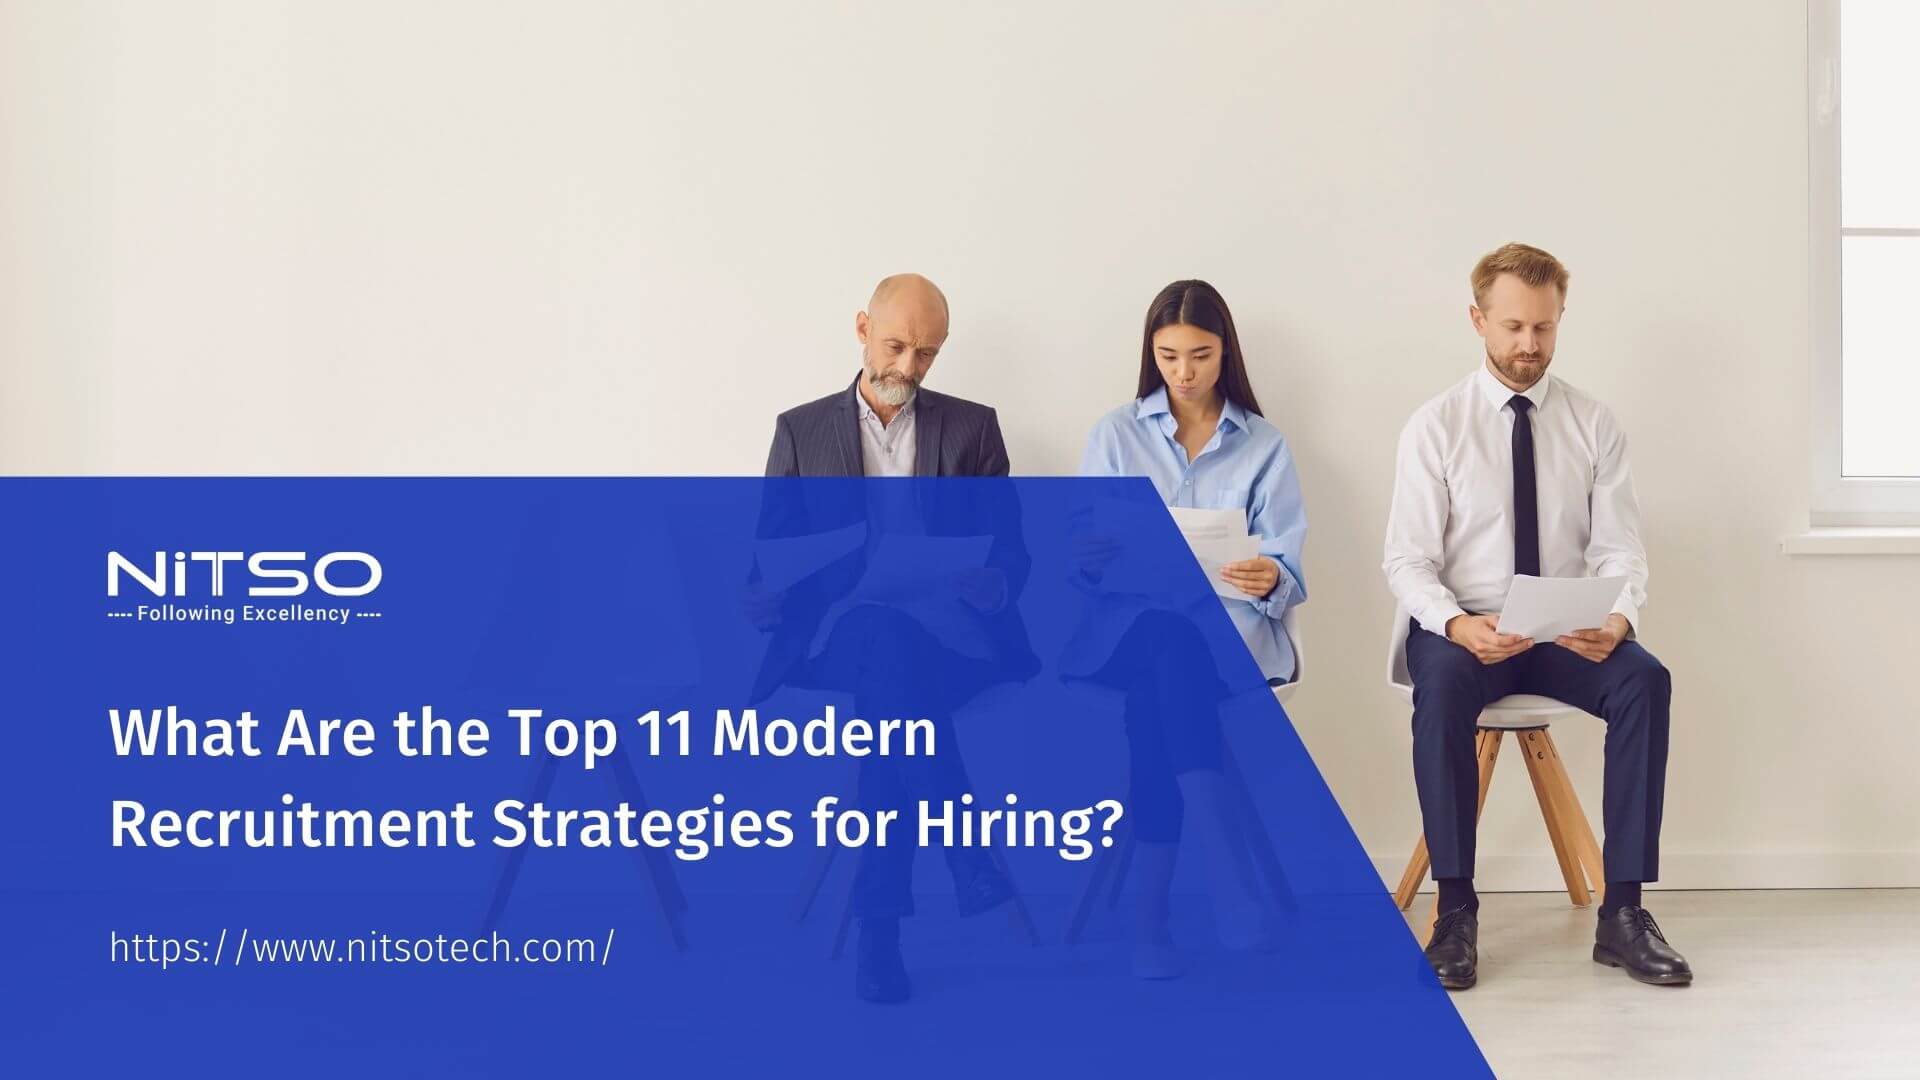 What Are the Top 11 Modern Recruitment Strategies for Hiring?